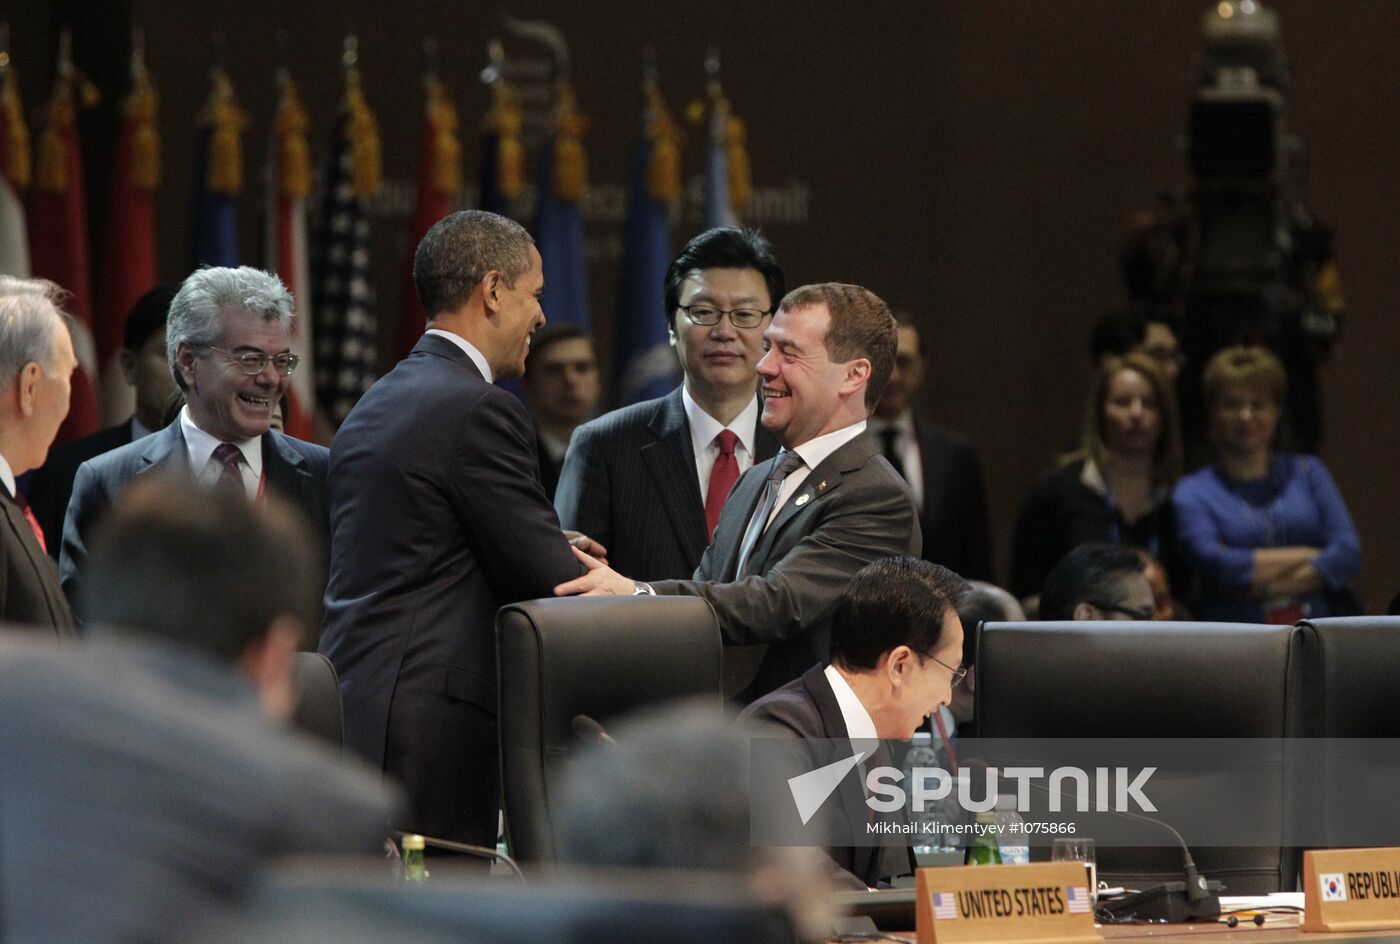 Dmitry Medvedev at the summit on nuclear security in Seoul